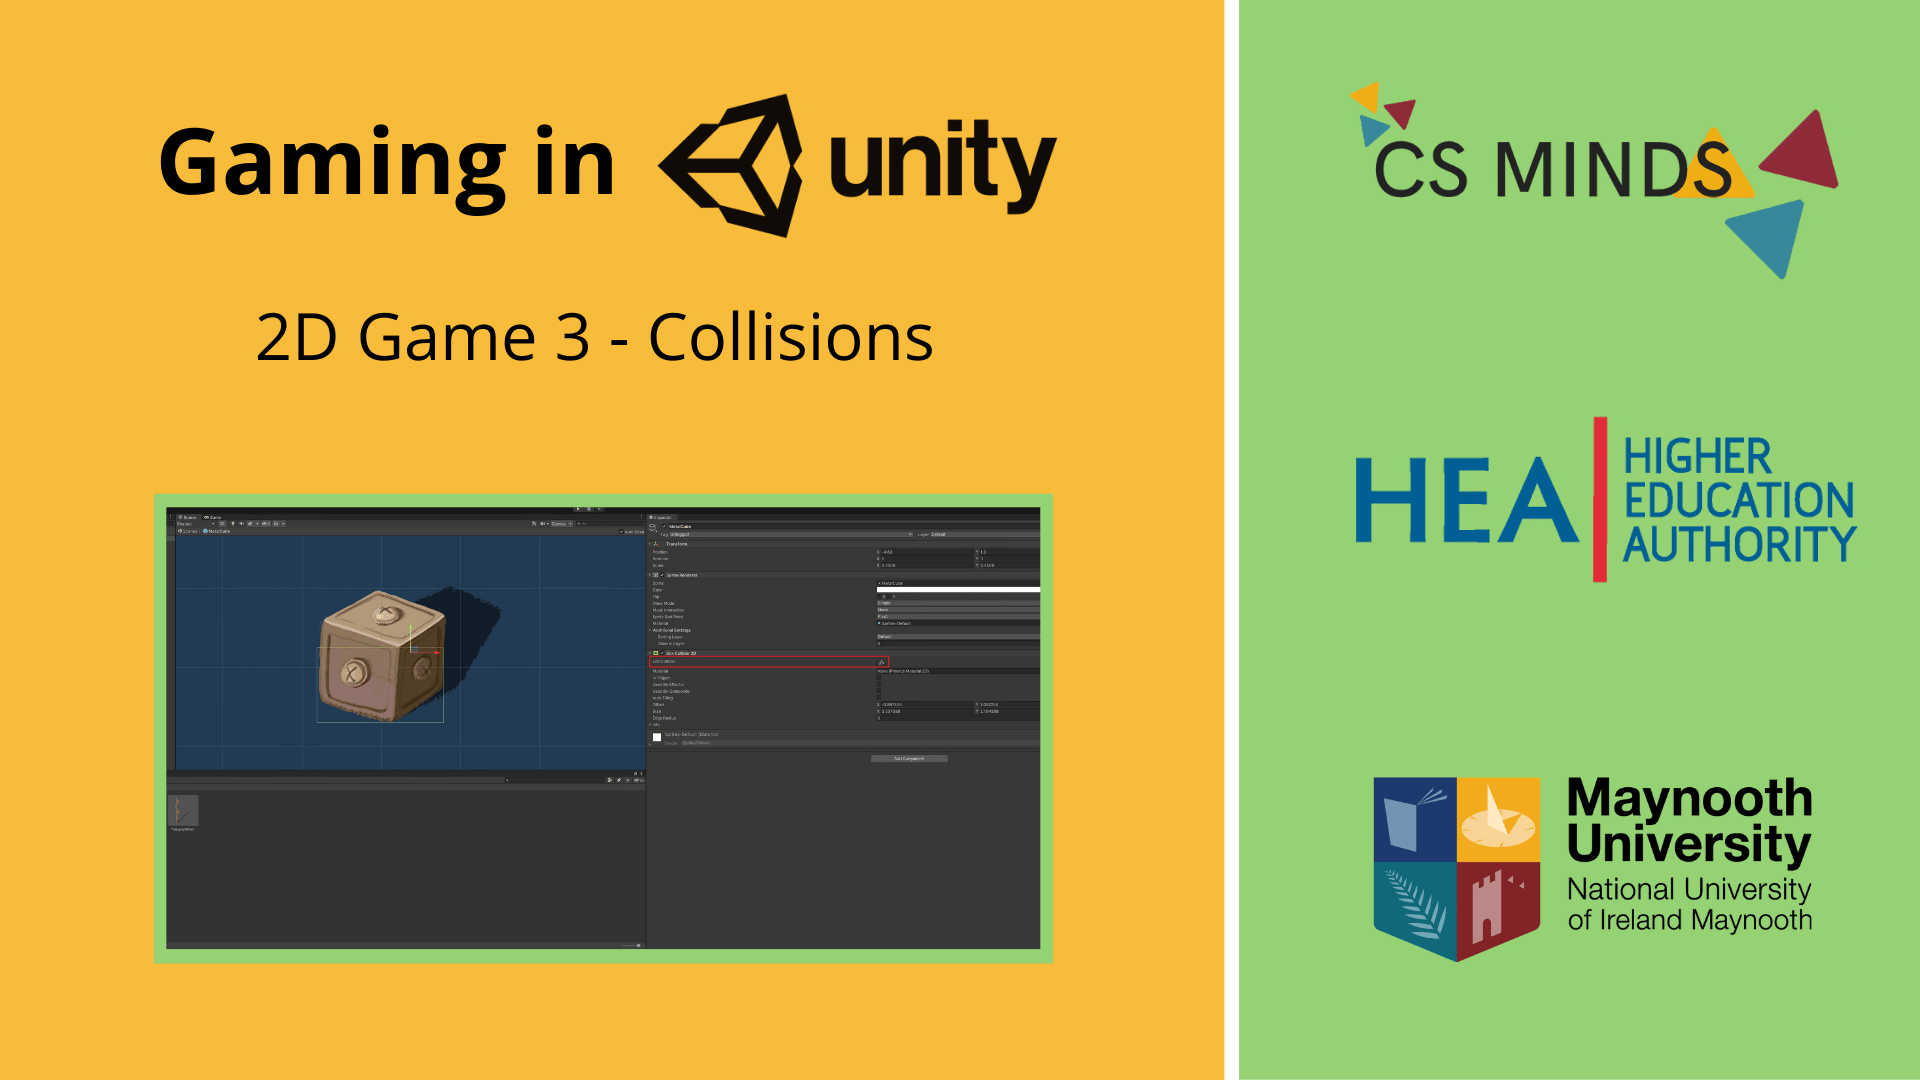 (../img/unity-7-2d-game-3-collisions/2d-game-3-collisions-header.png)